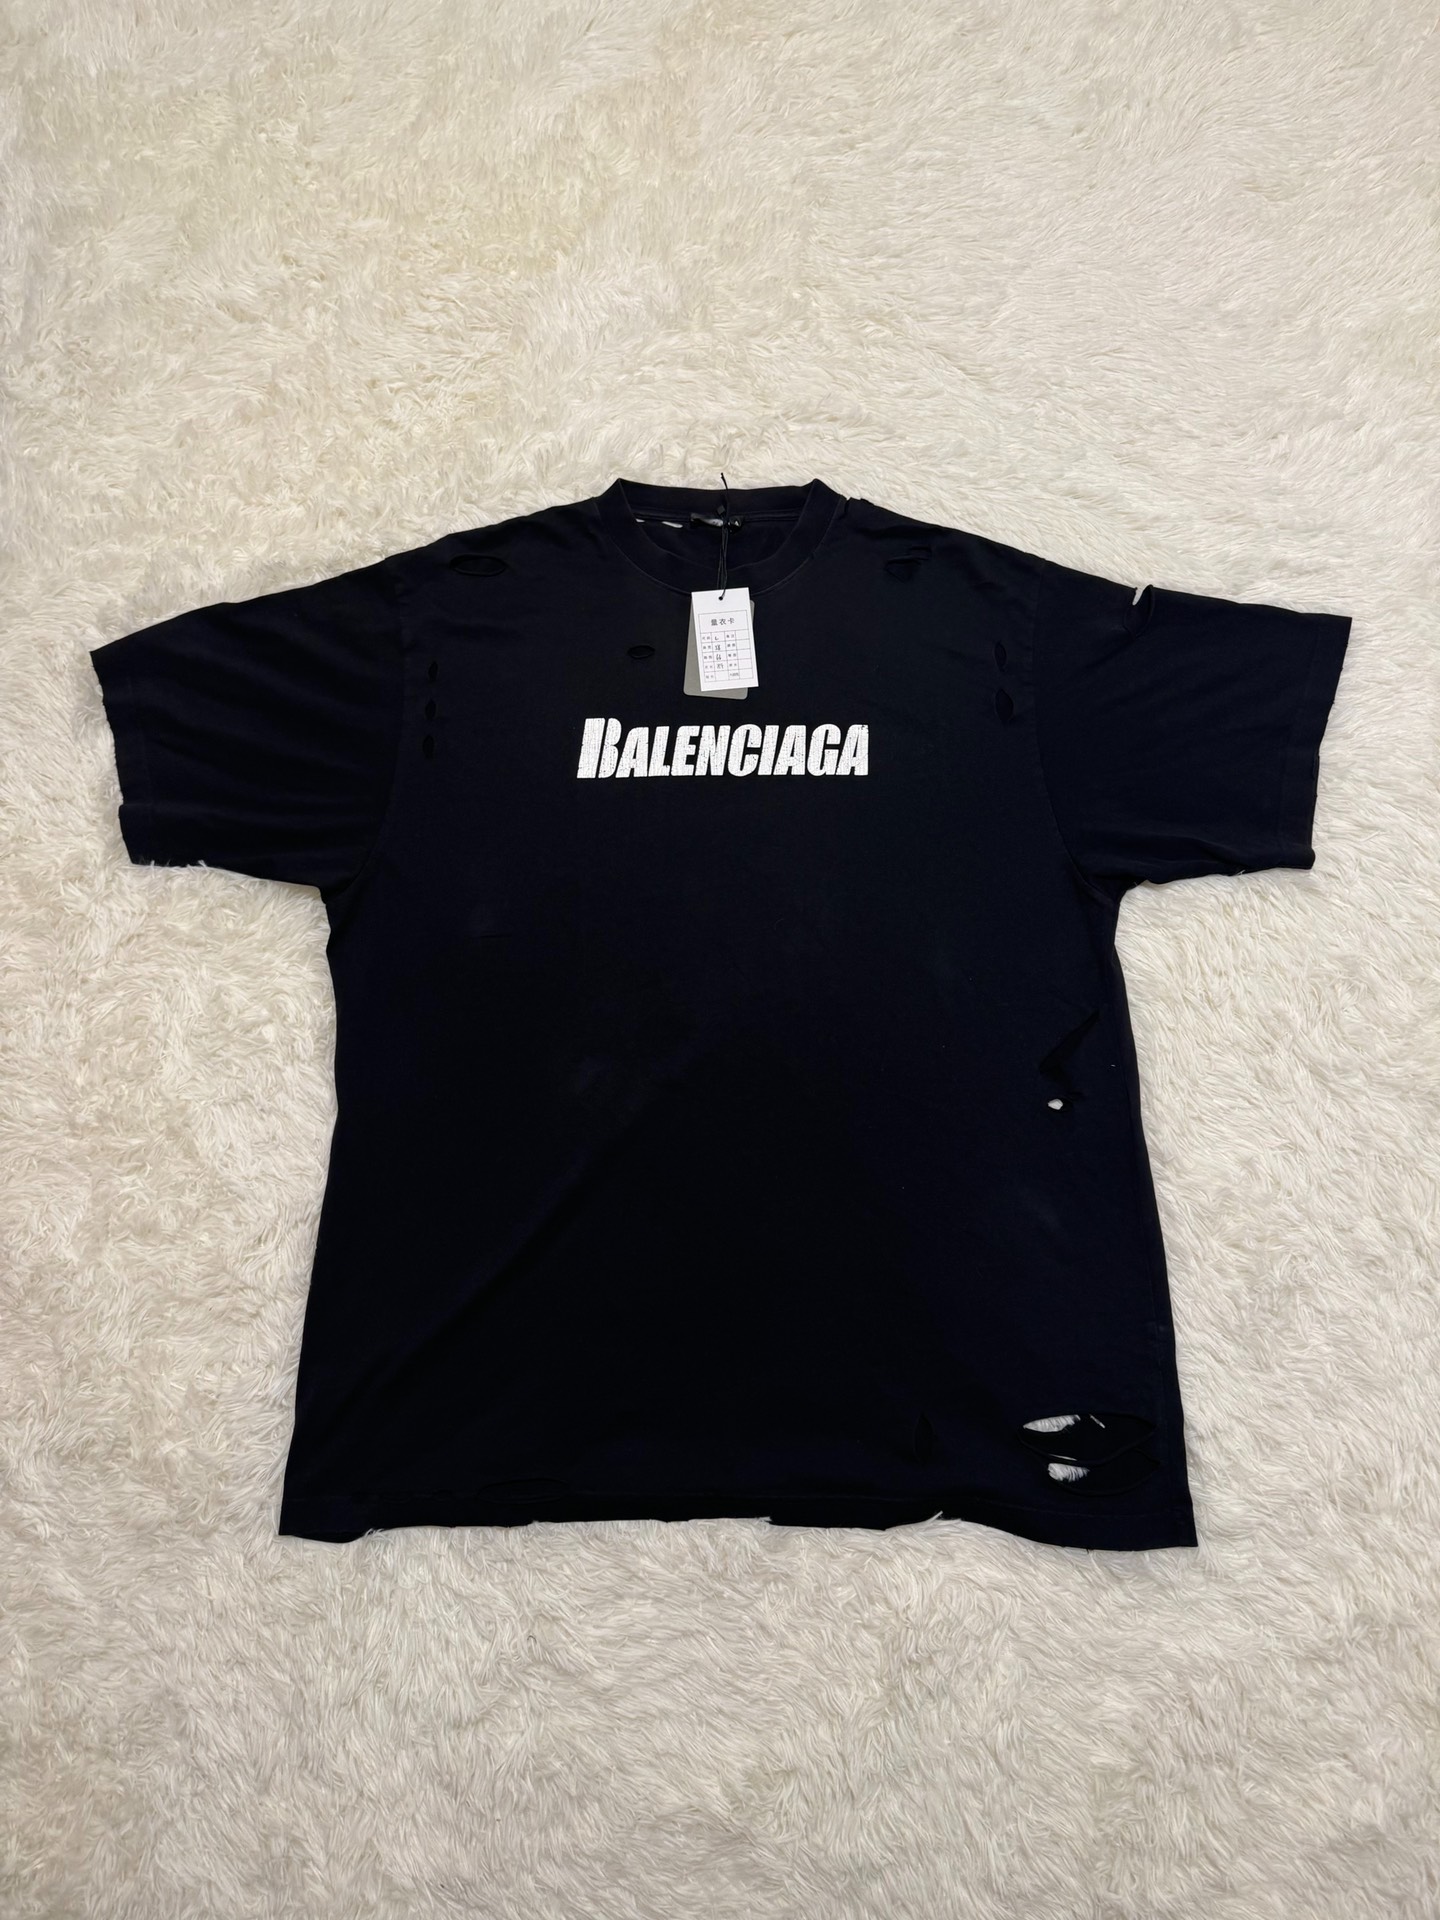 Balenciaga Letter Printed Distressed Round Neck Short Sleeve - 1